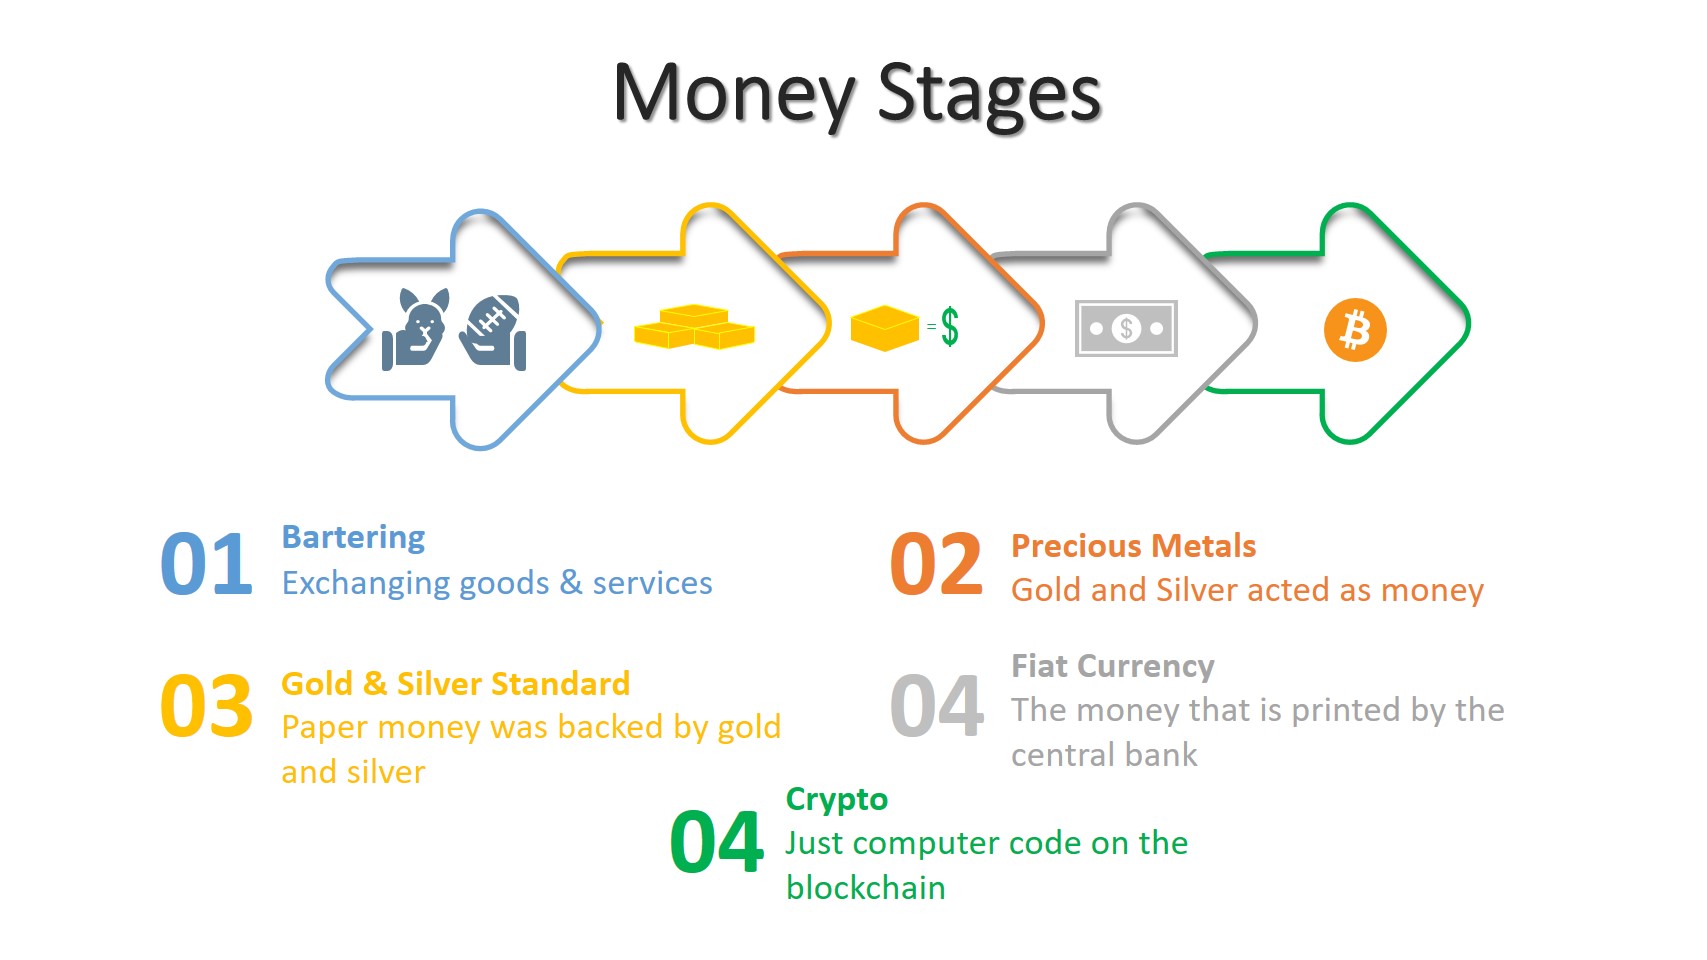 Money Evolution and Its Stages Explained